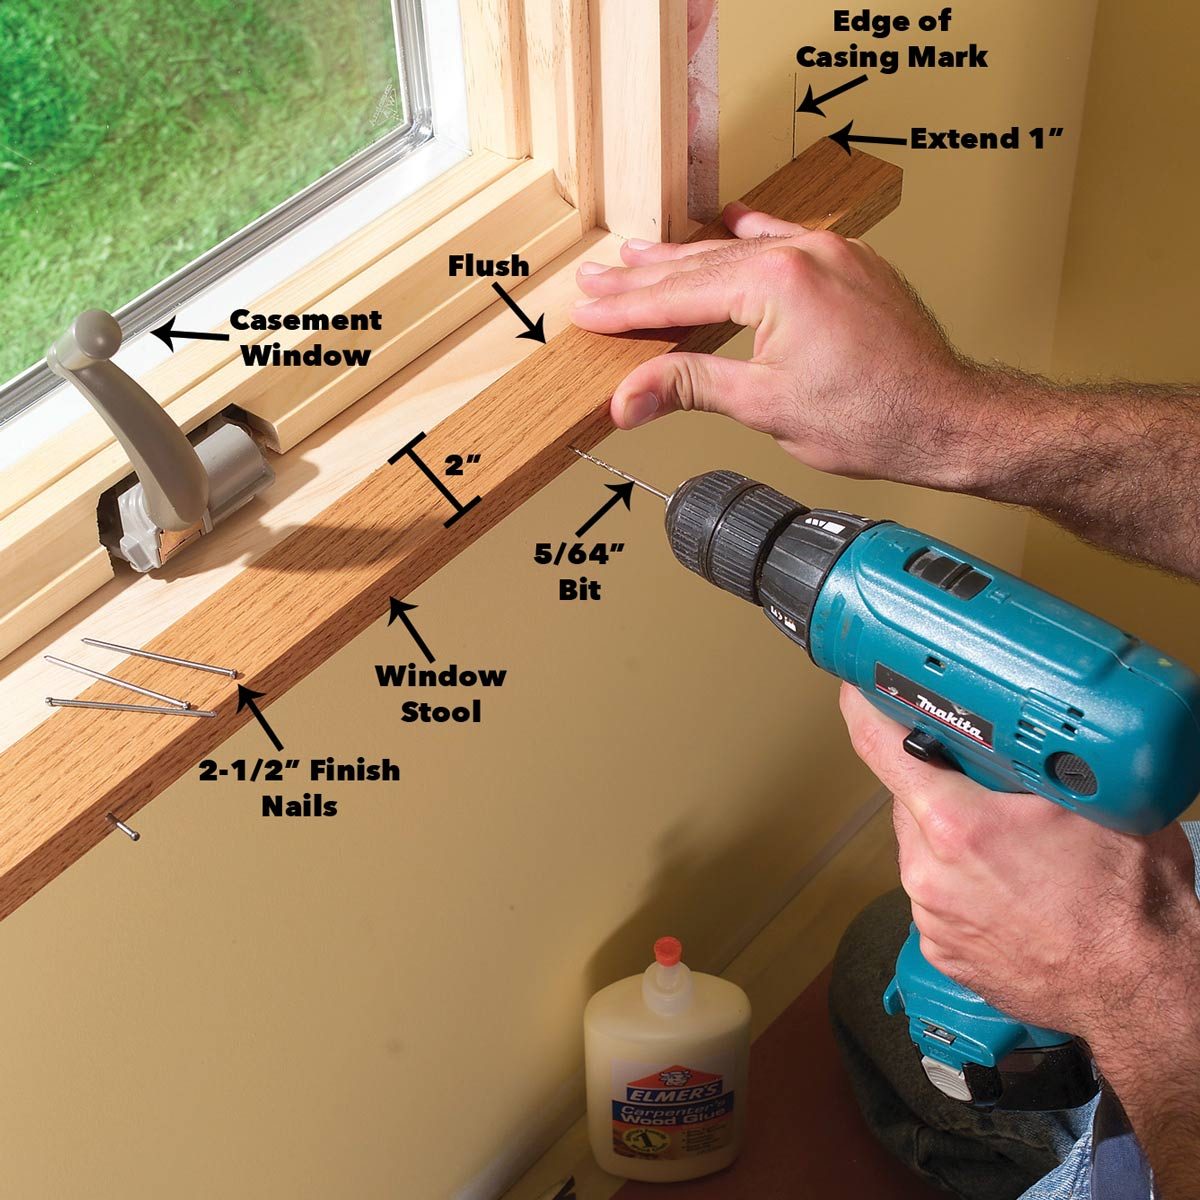 install window stool and apron